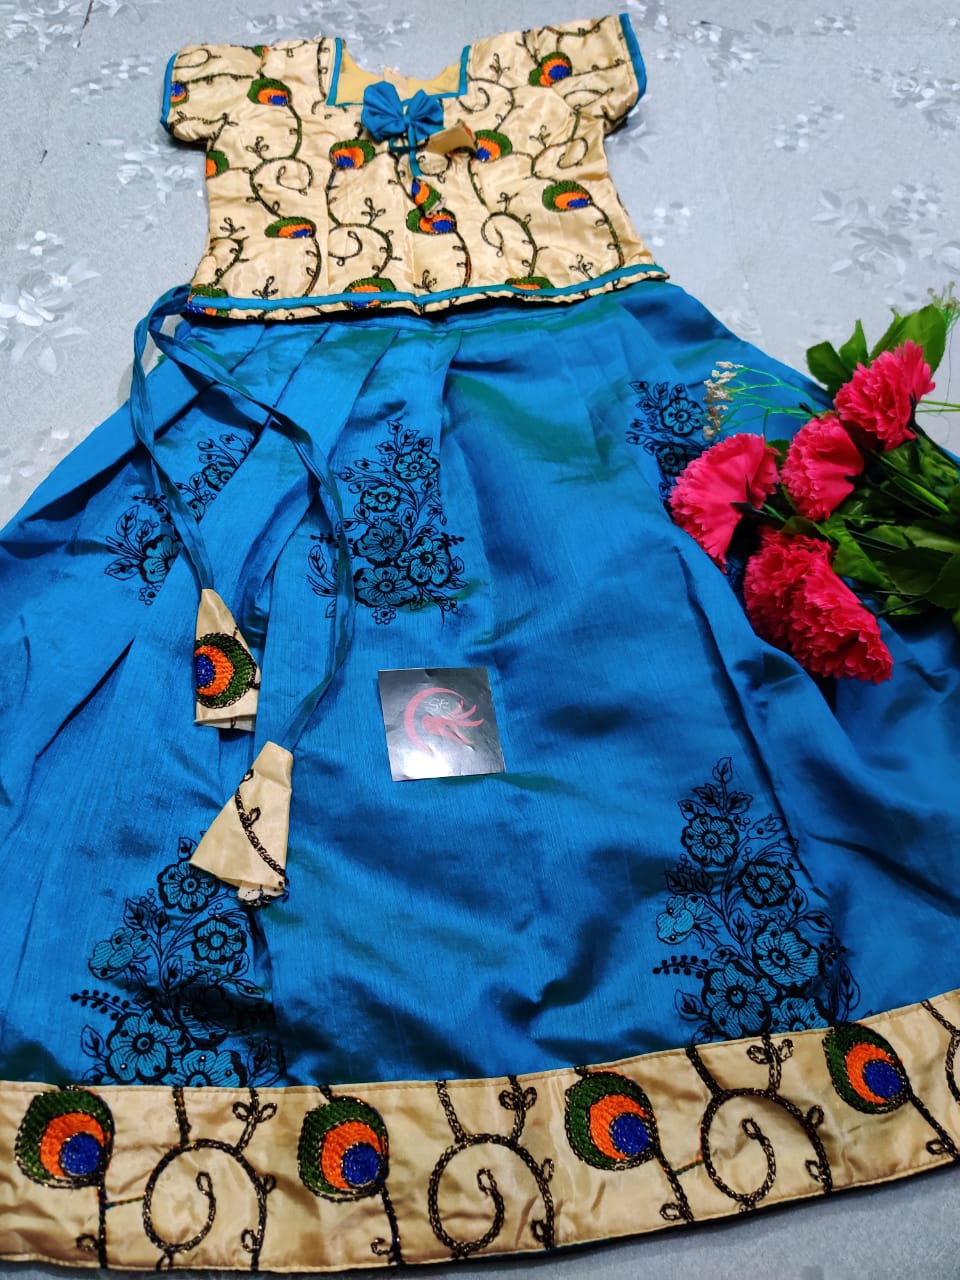 1 - 12 raw silk top with mirror/ thread embroidery work